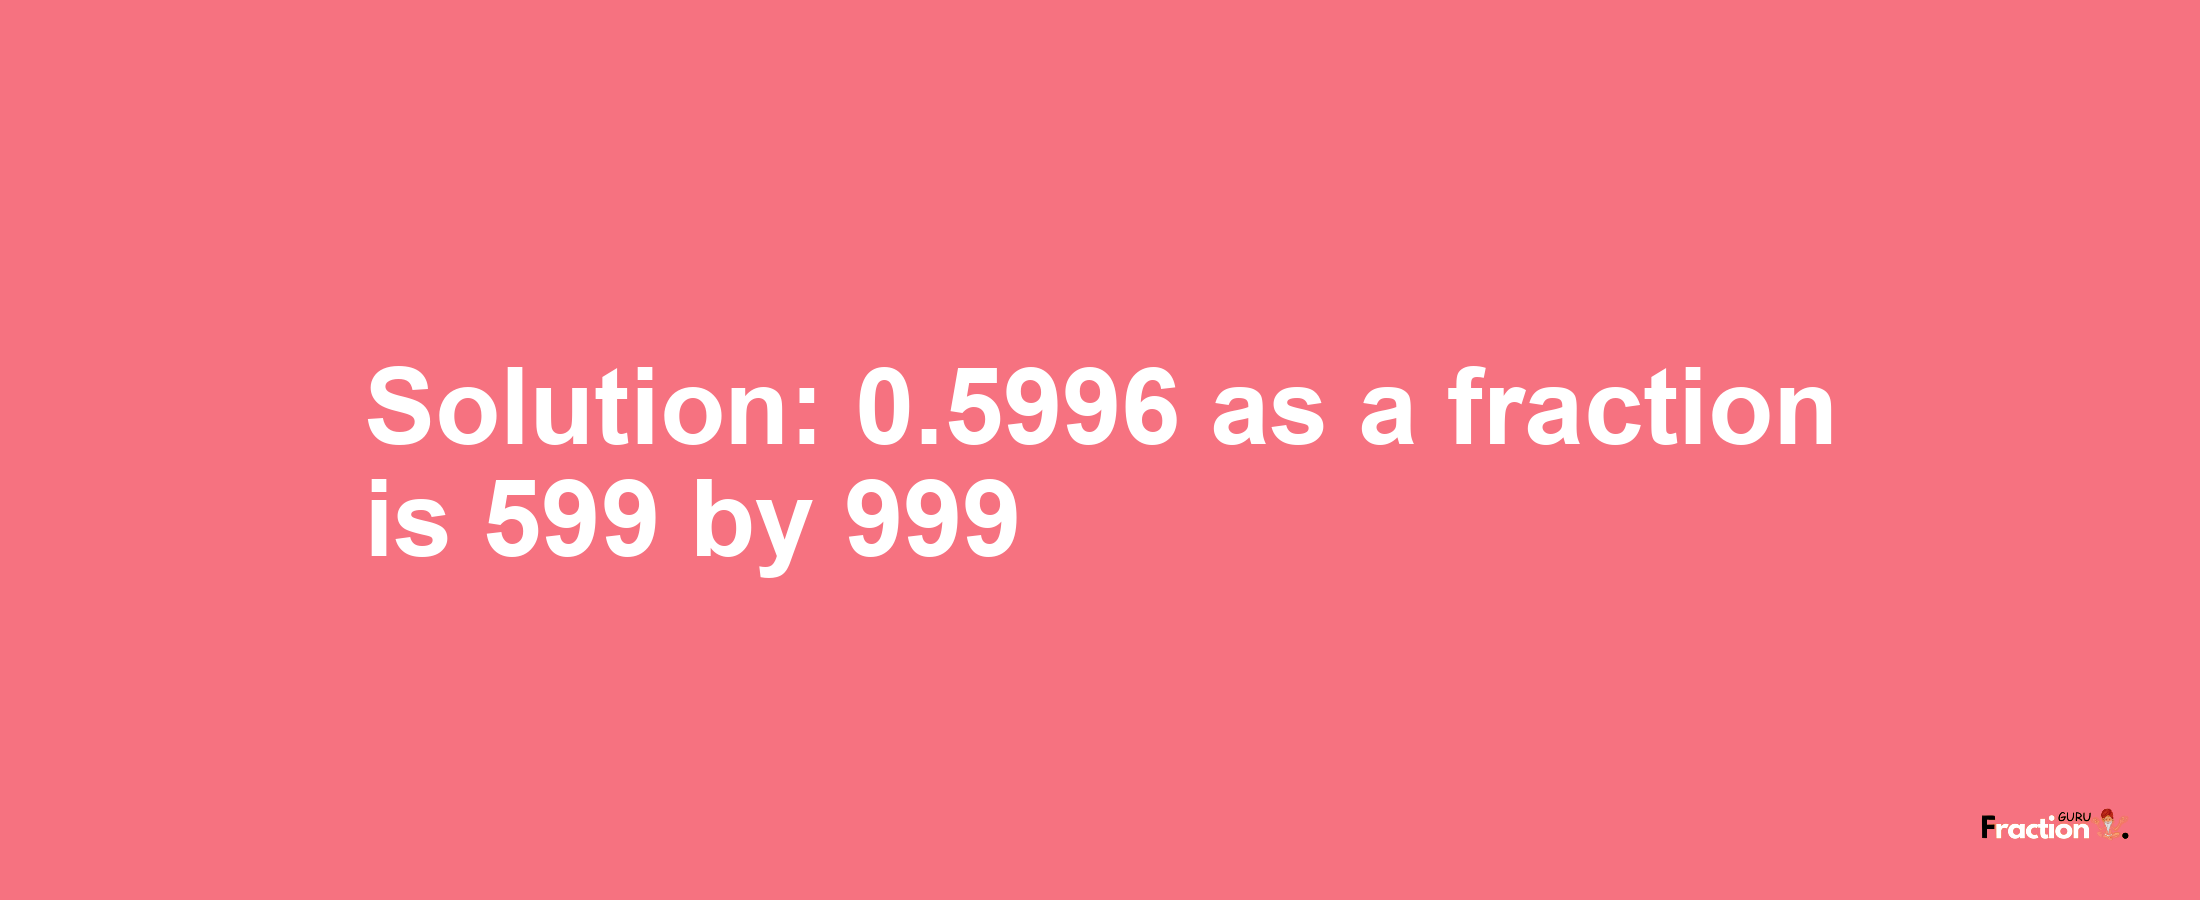 Solution:0.5996 as a fraction is 599/999